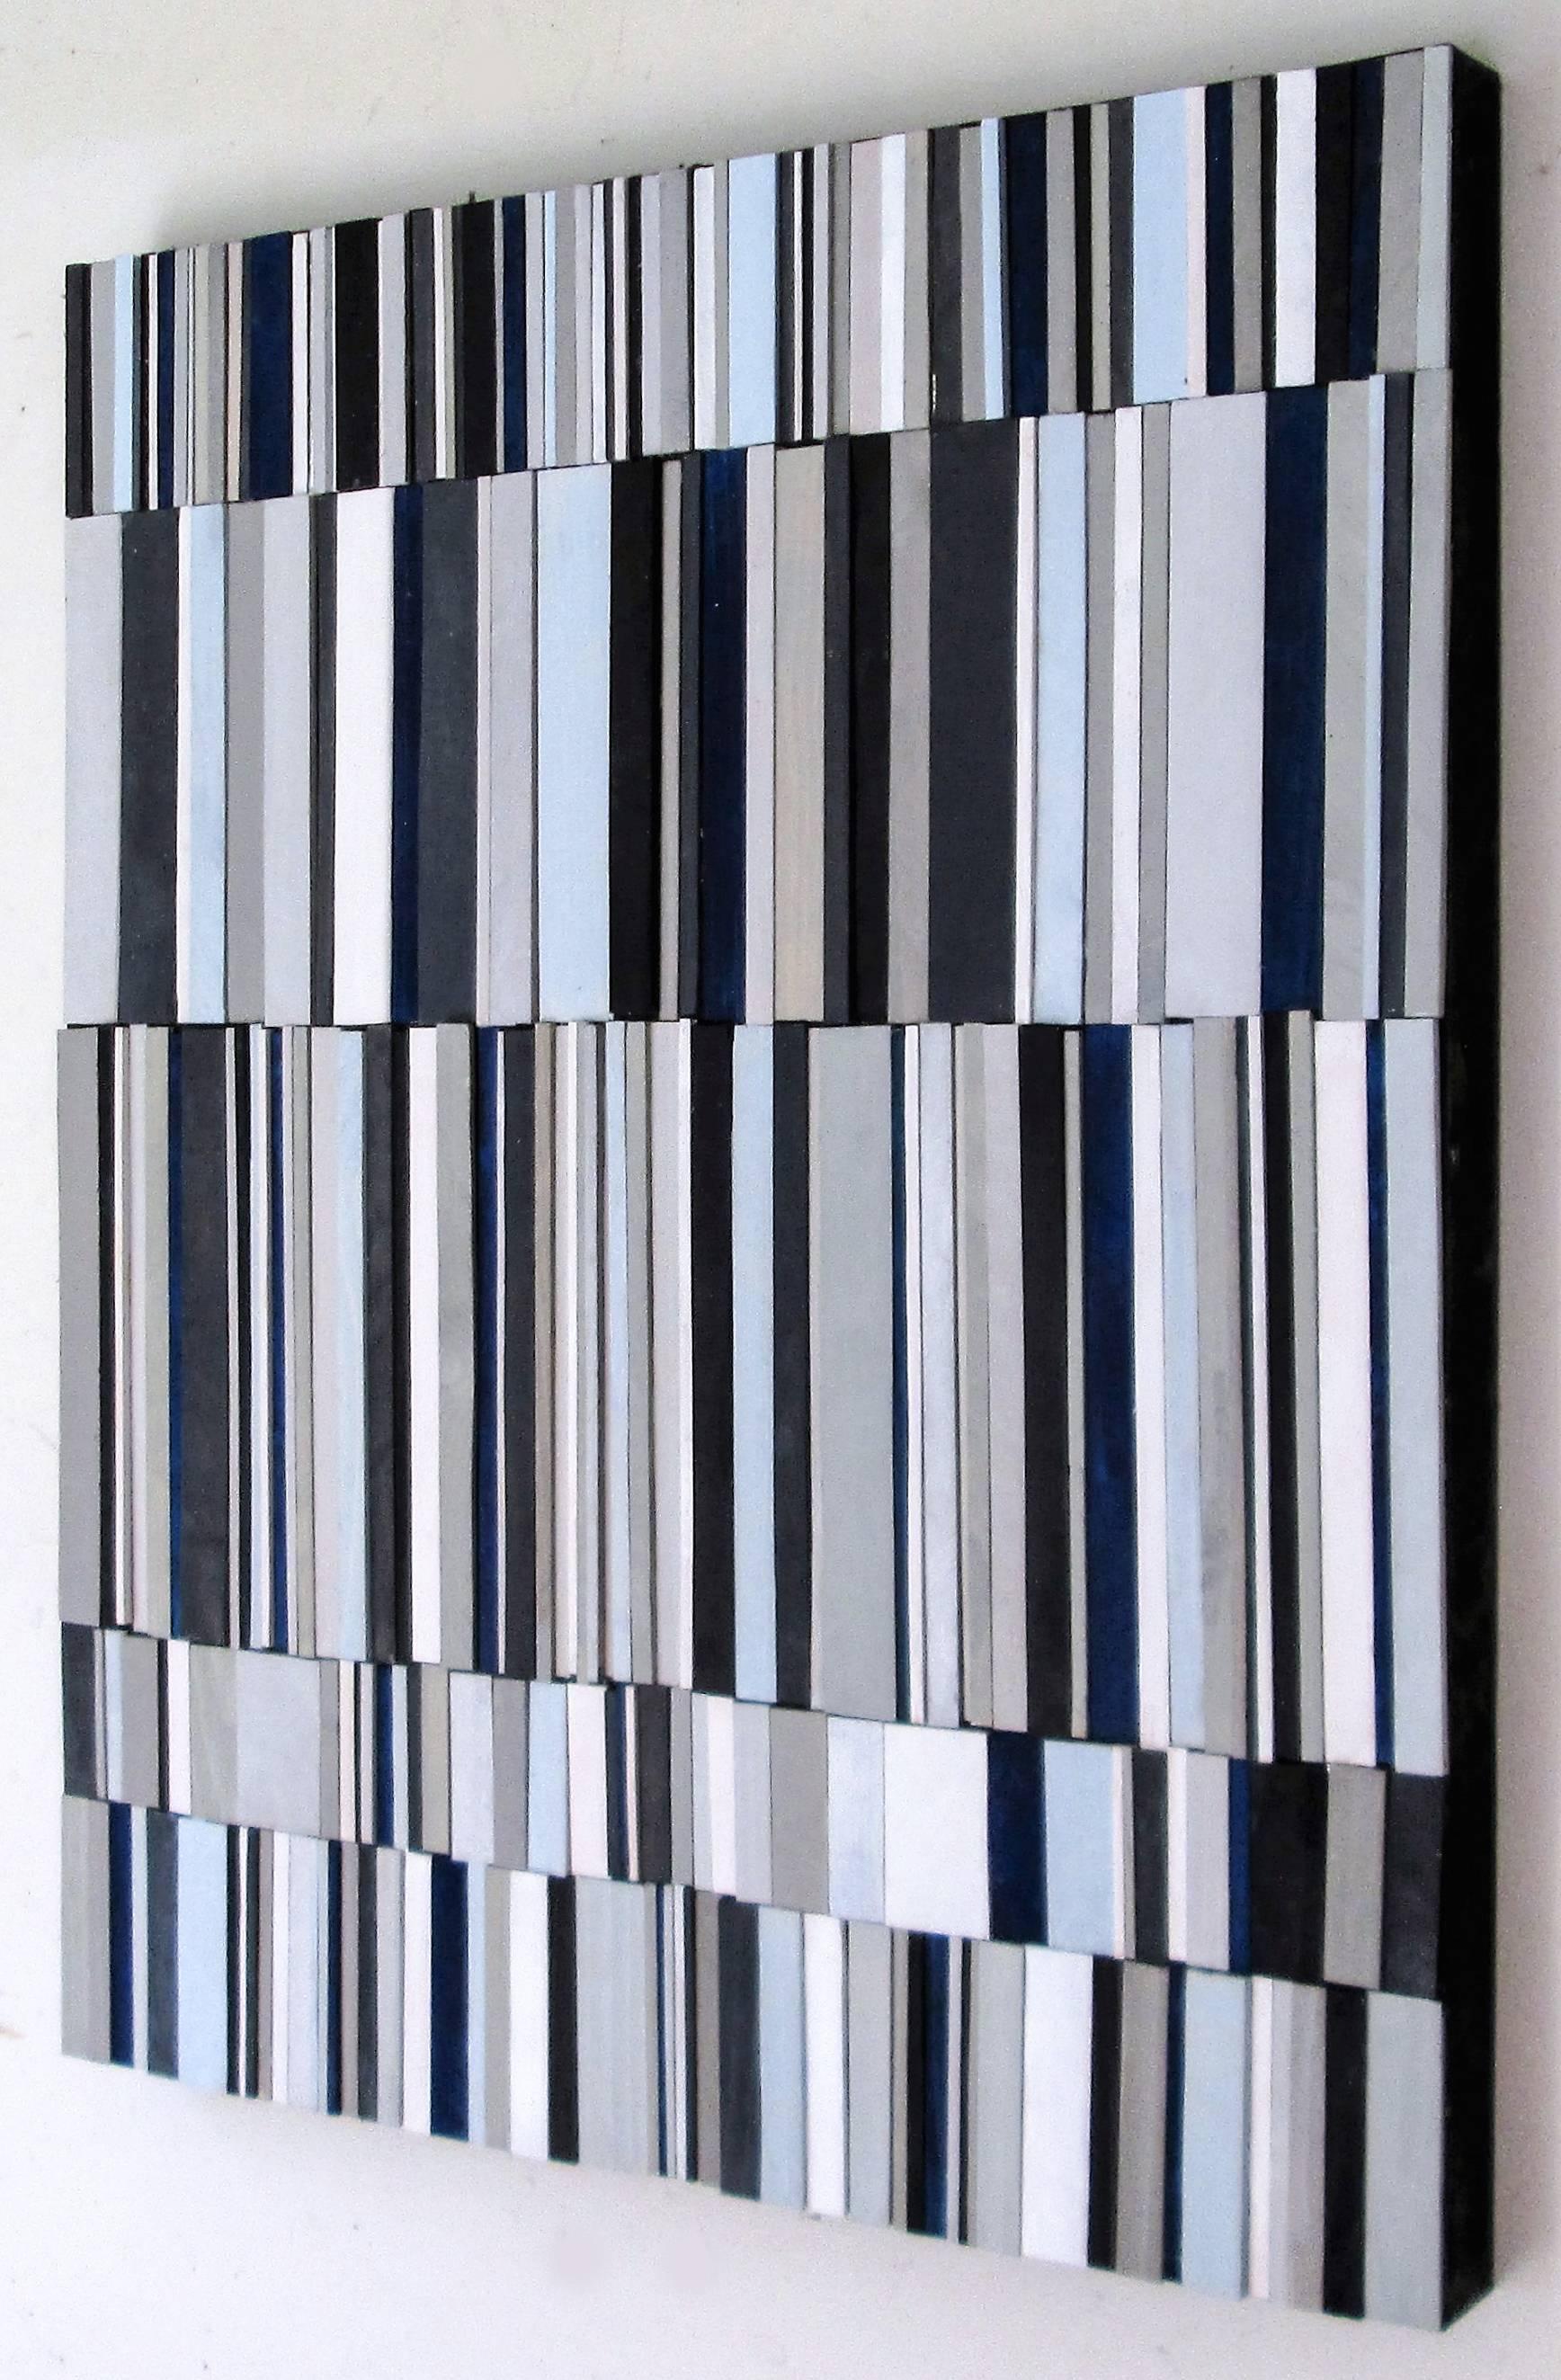 Syncopation, Variation I (Graphic Blue White and Gray 3D Wall Sculpture) - Brown Abstract Sculpture by Stephen Walling